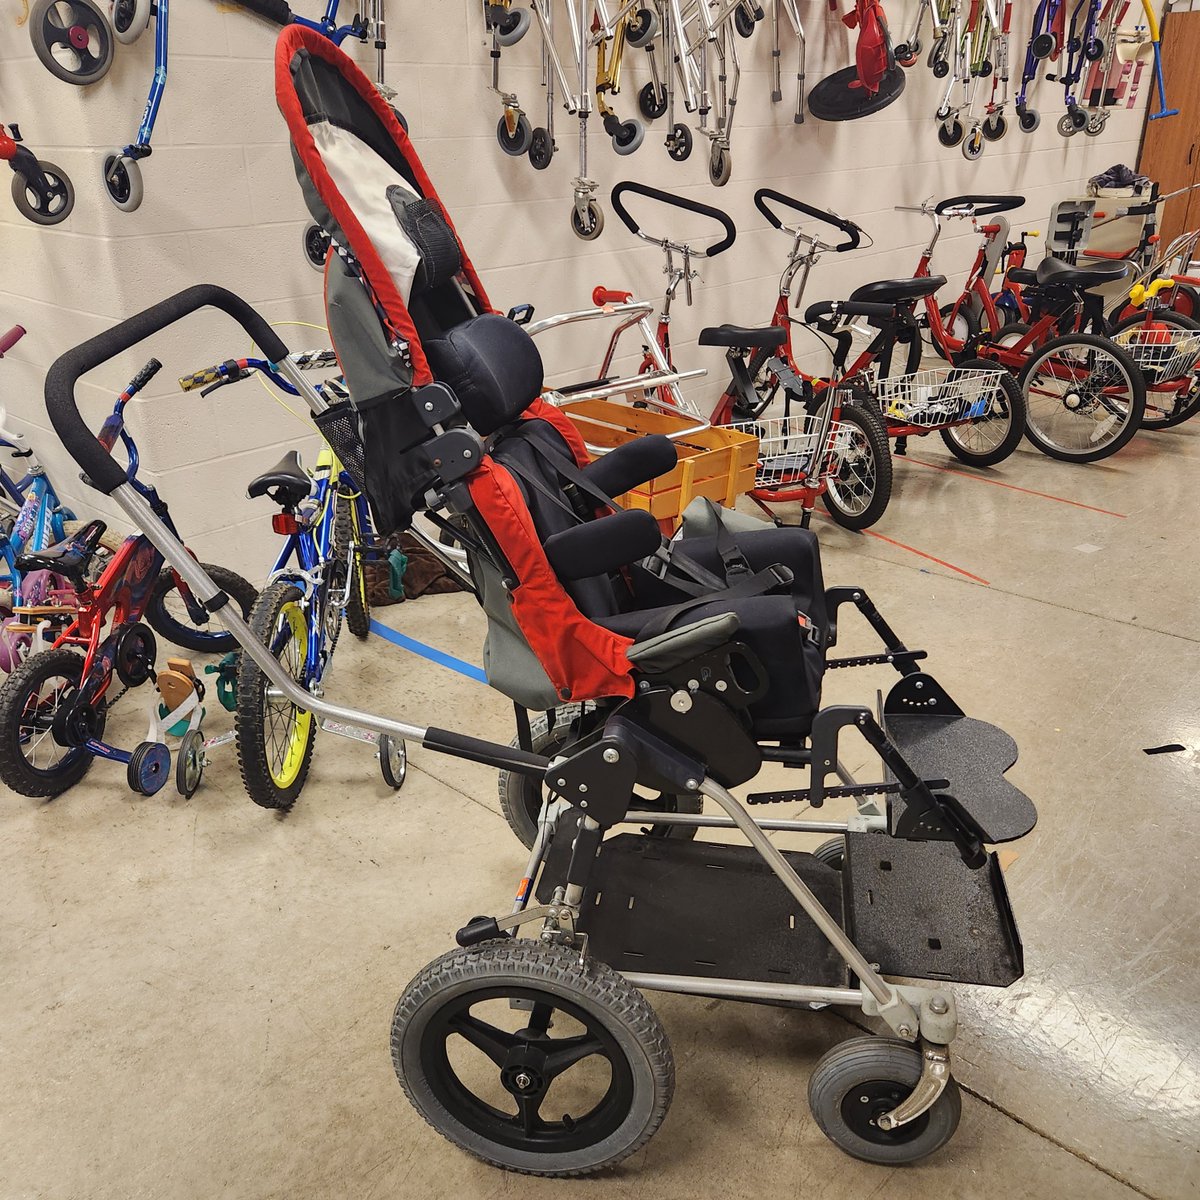 Turnstone's (free!) Equipment Loan program has several adaptive strollers available. You can loan them out for as long as you need them. First come, first serve. Call 260-483-2100! If you have gently used equipment like these adaptive strollers, consider donating it to Turnstone